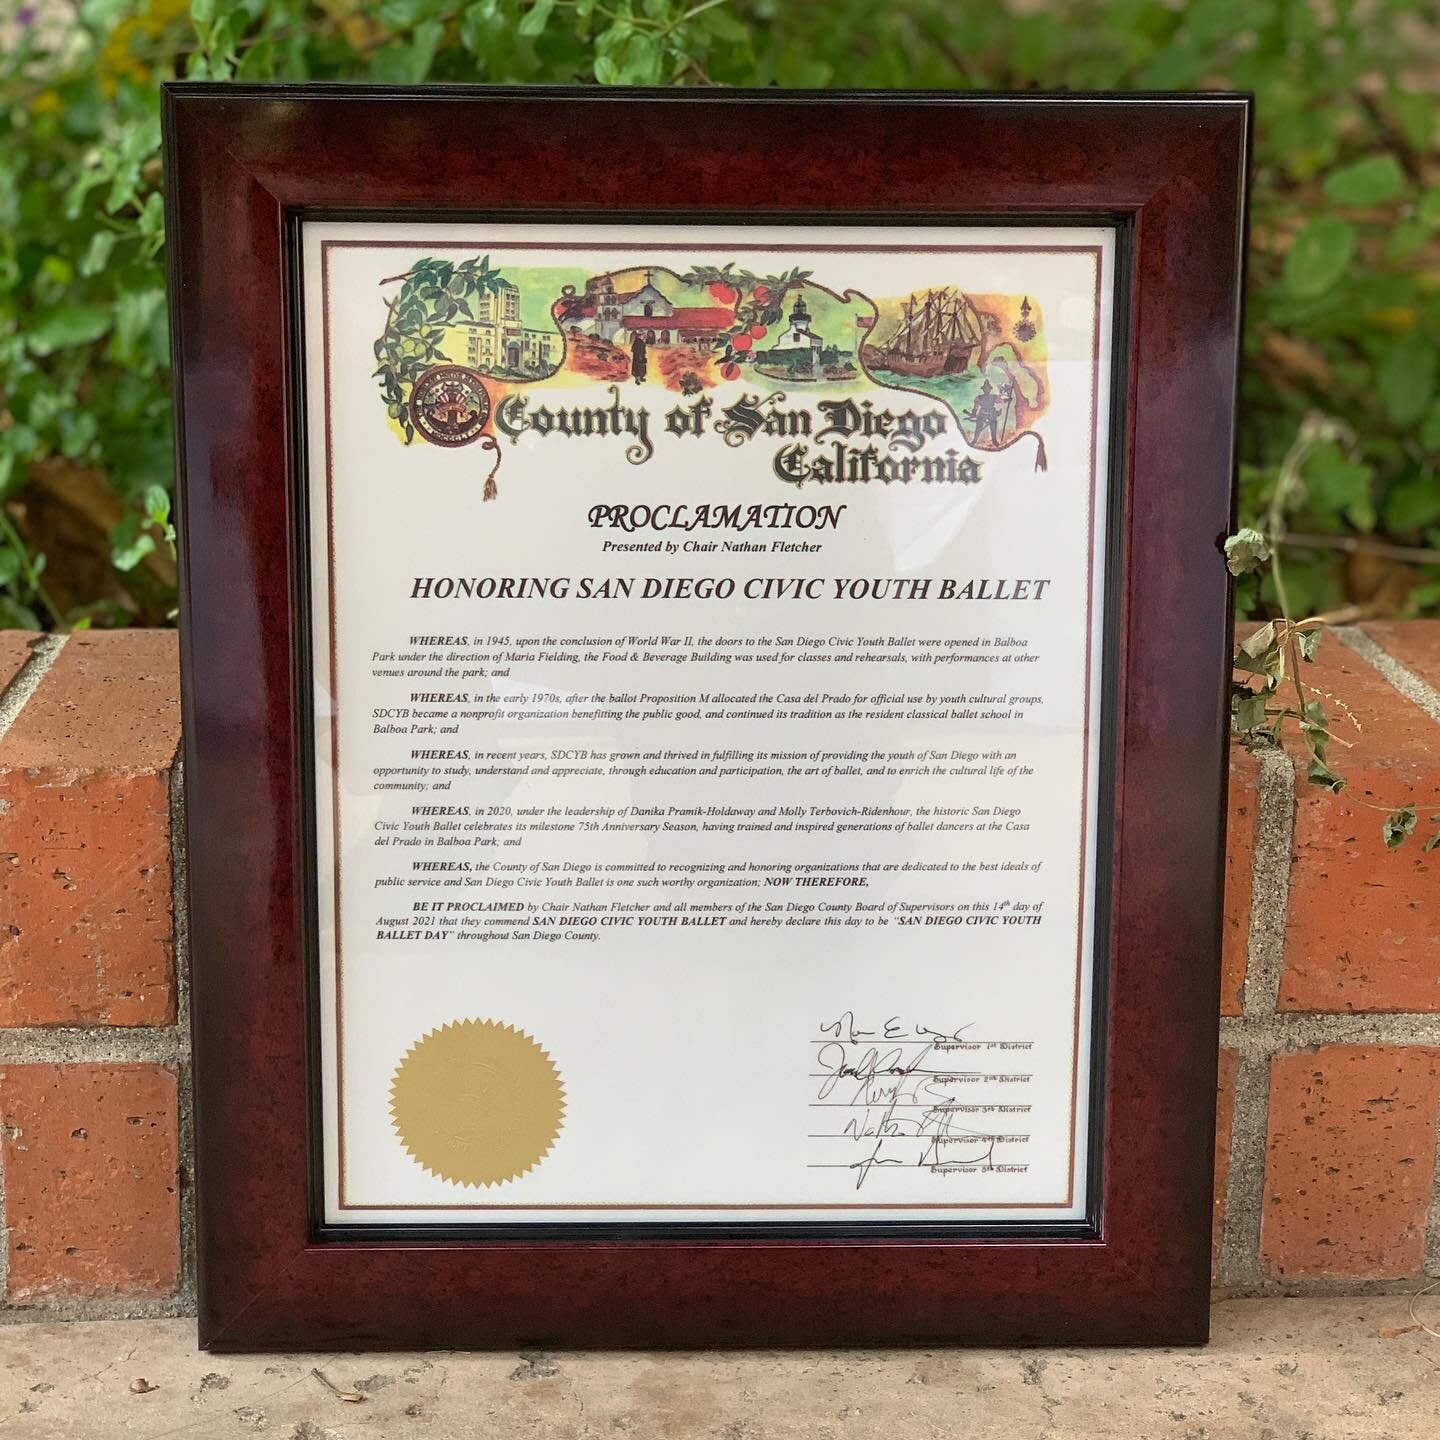 THIS IS A VERY SPECIAL POST!!!!!!!! Today, in recognition of our unparalleled legacy and dedication to youth ballet education for over 75 years, the County of San Diego proclaimed that August 14, 2021, shall forever be known as &ldquo;San Diego Civic